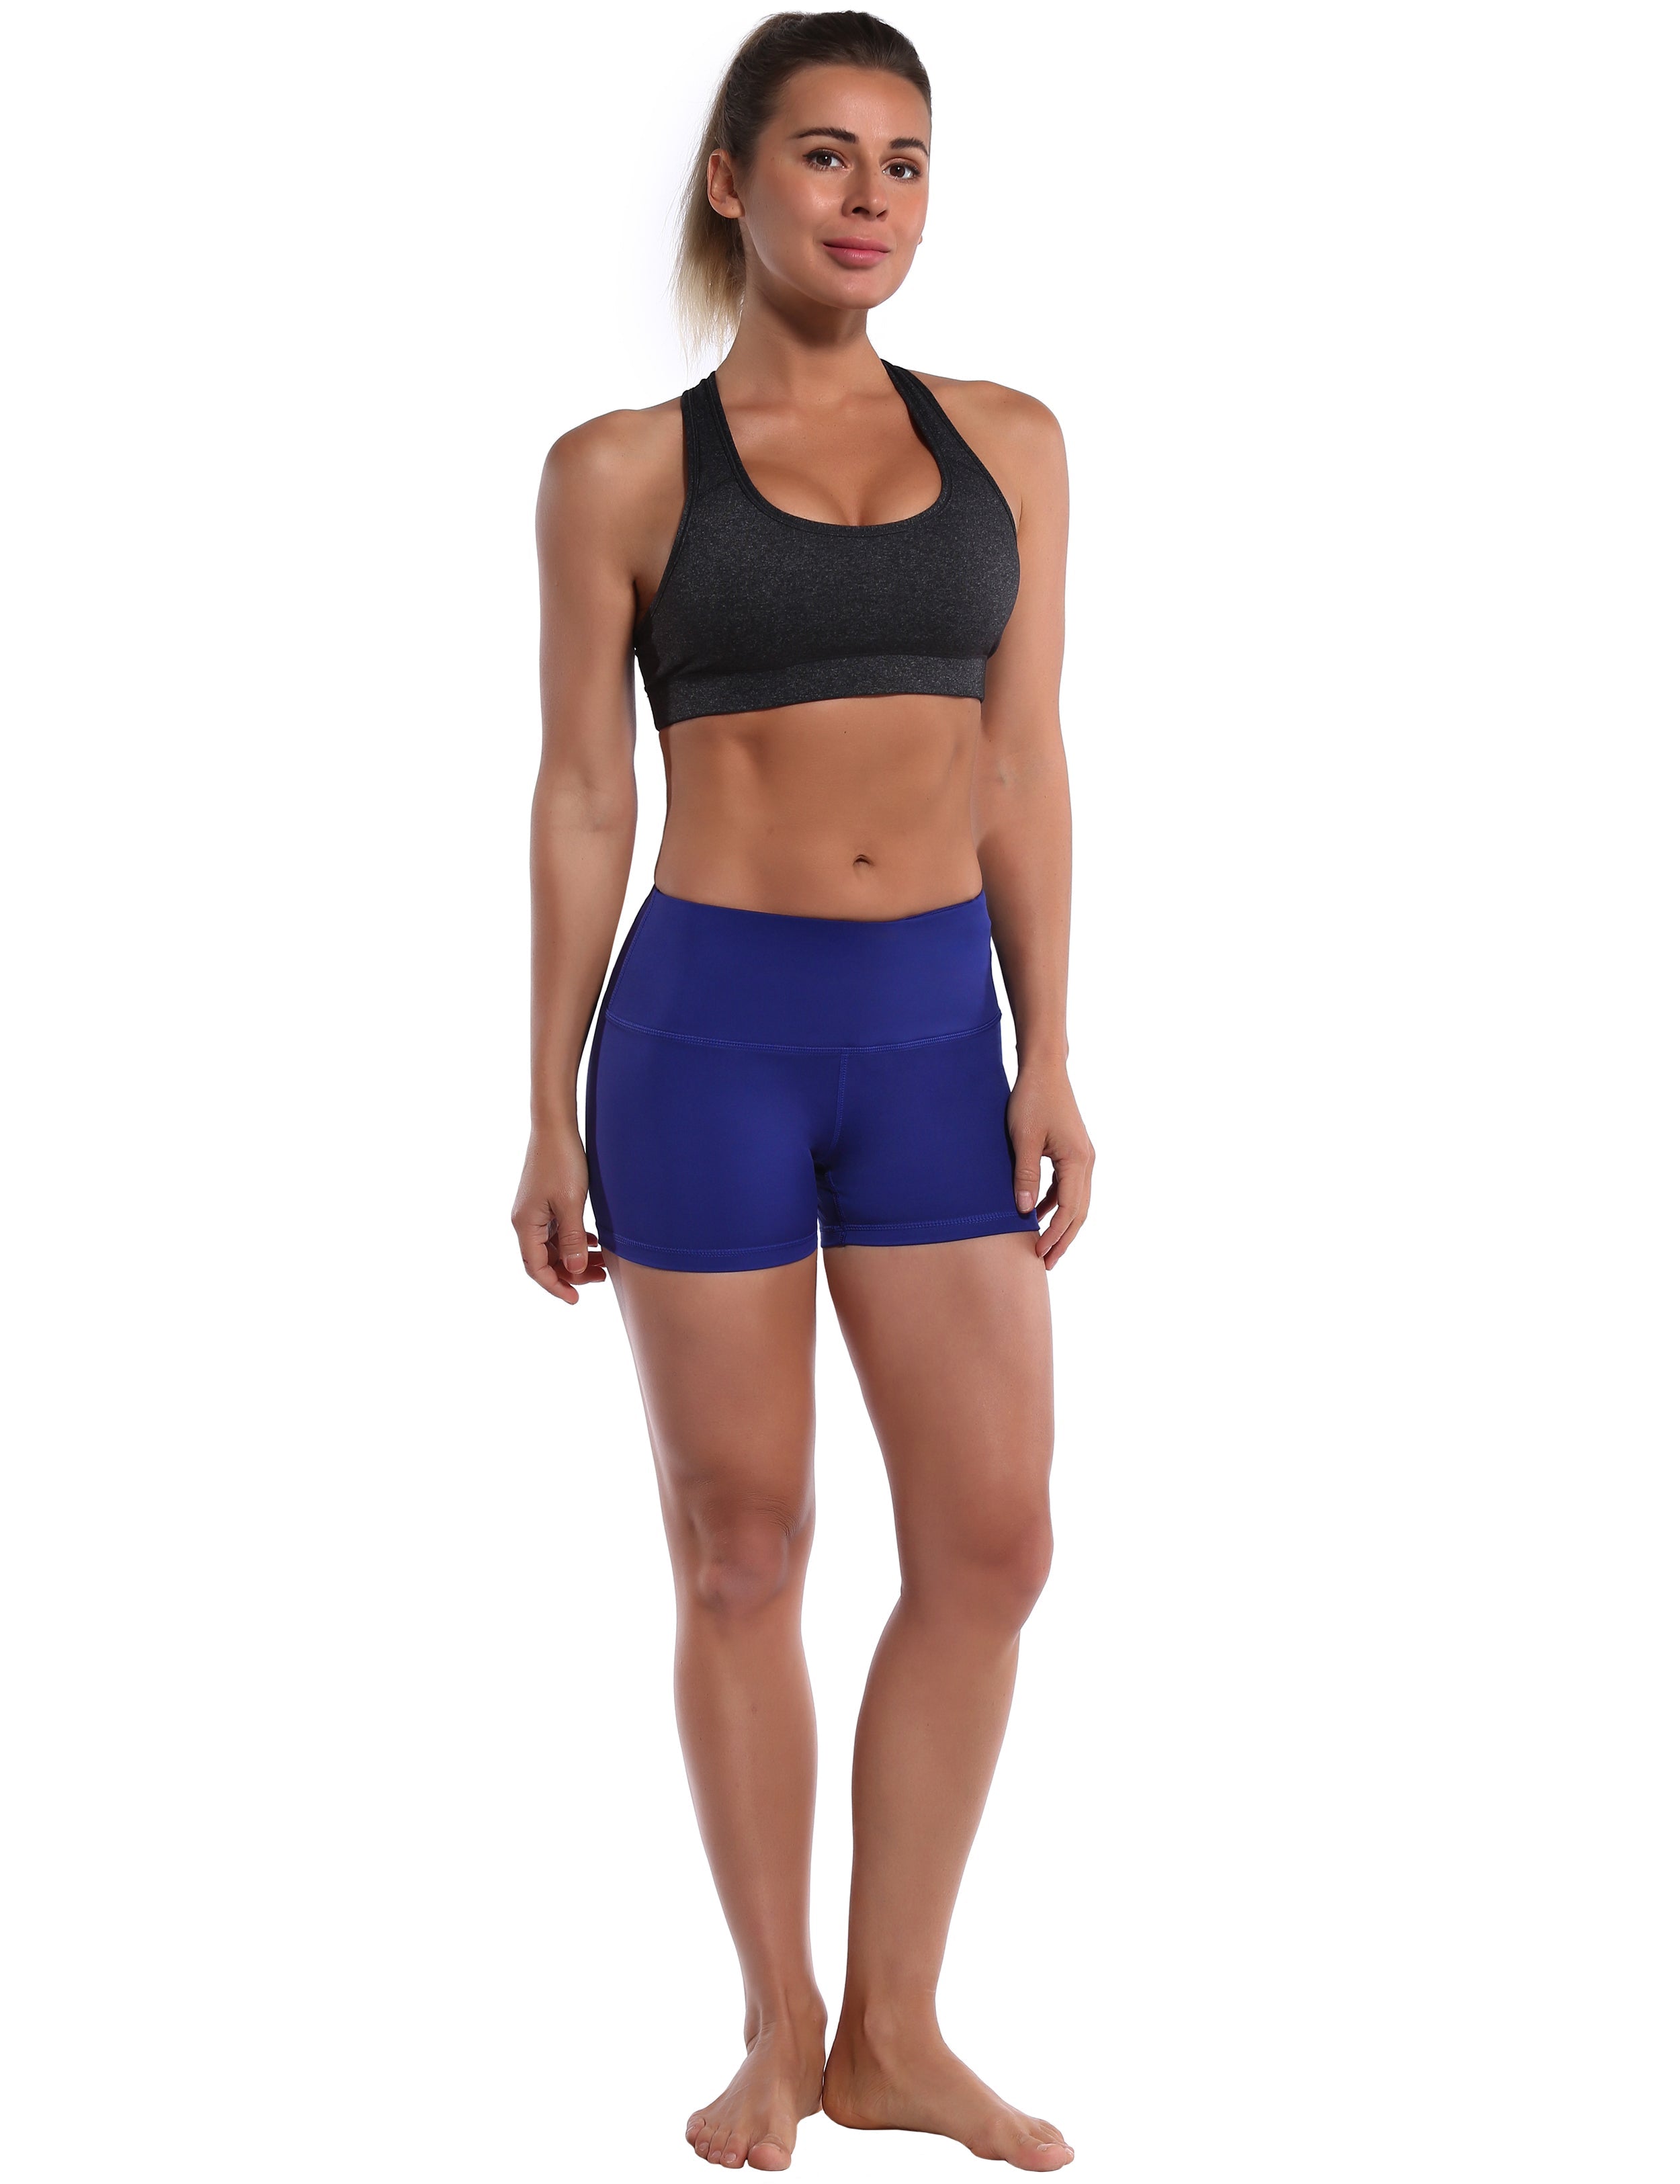 2.5" Yoga Shorts navy Softest-ever fabric High elasticity High density 4-way stretch Fabric doesn't attract lint easily No see-through Moisture-wicking Machine wash 75% Nylon, 25% Spandex